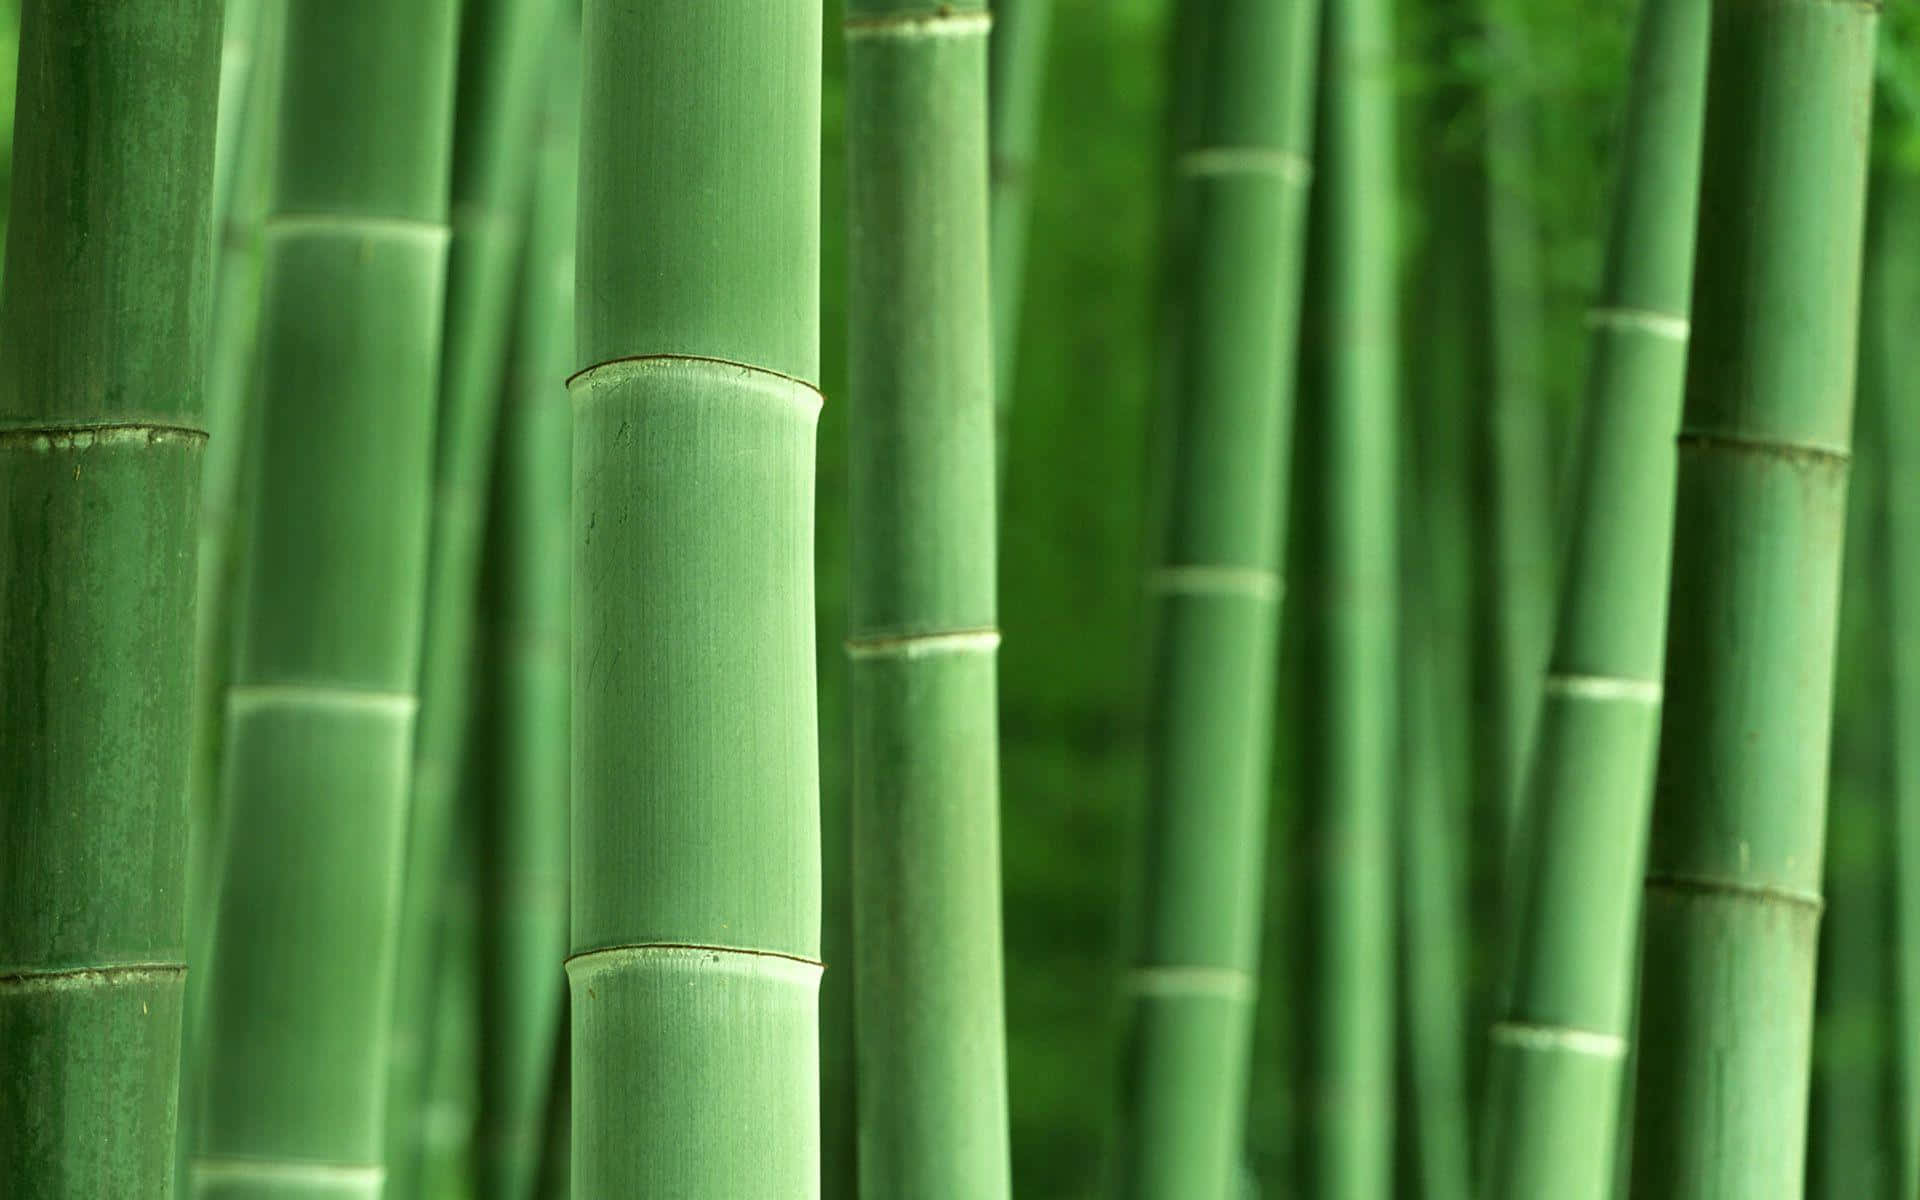 Image  Freshly harvested bamboo in Asia